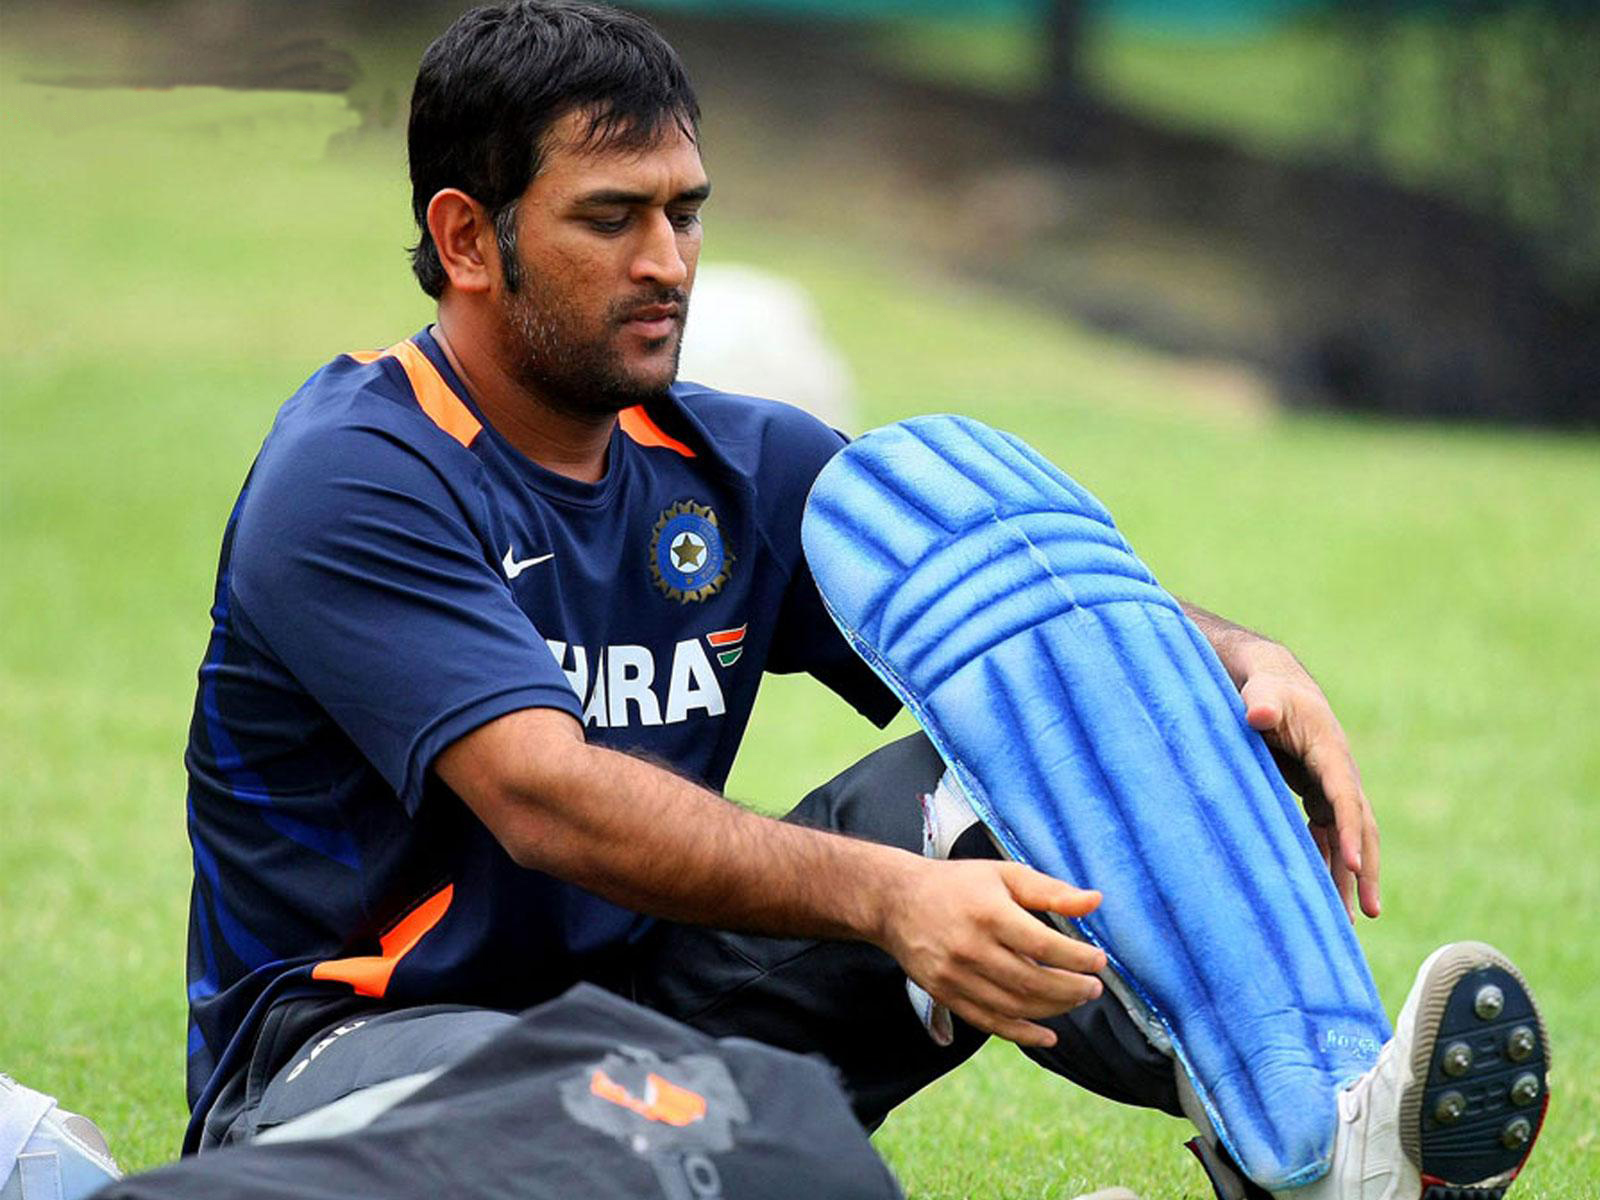 Dhoni Wallpapers Free Download Group - Ms Dhoni Image Hot - 1600x1200  Wallpaper 